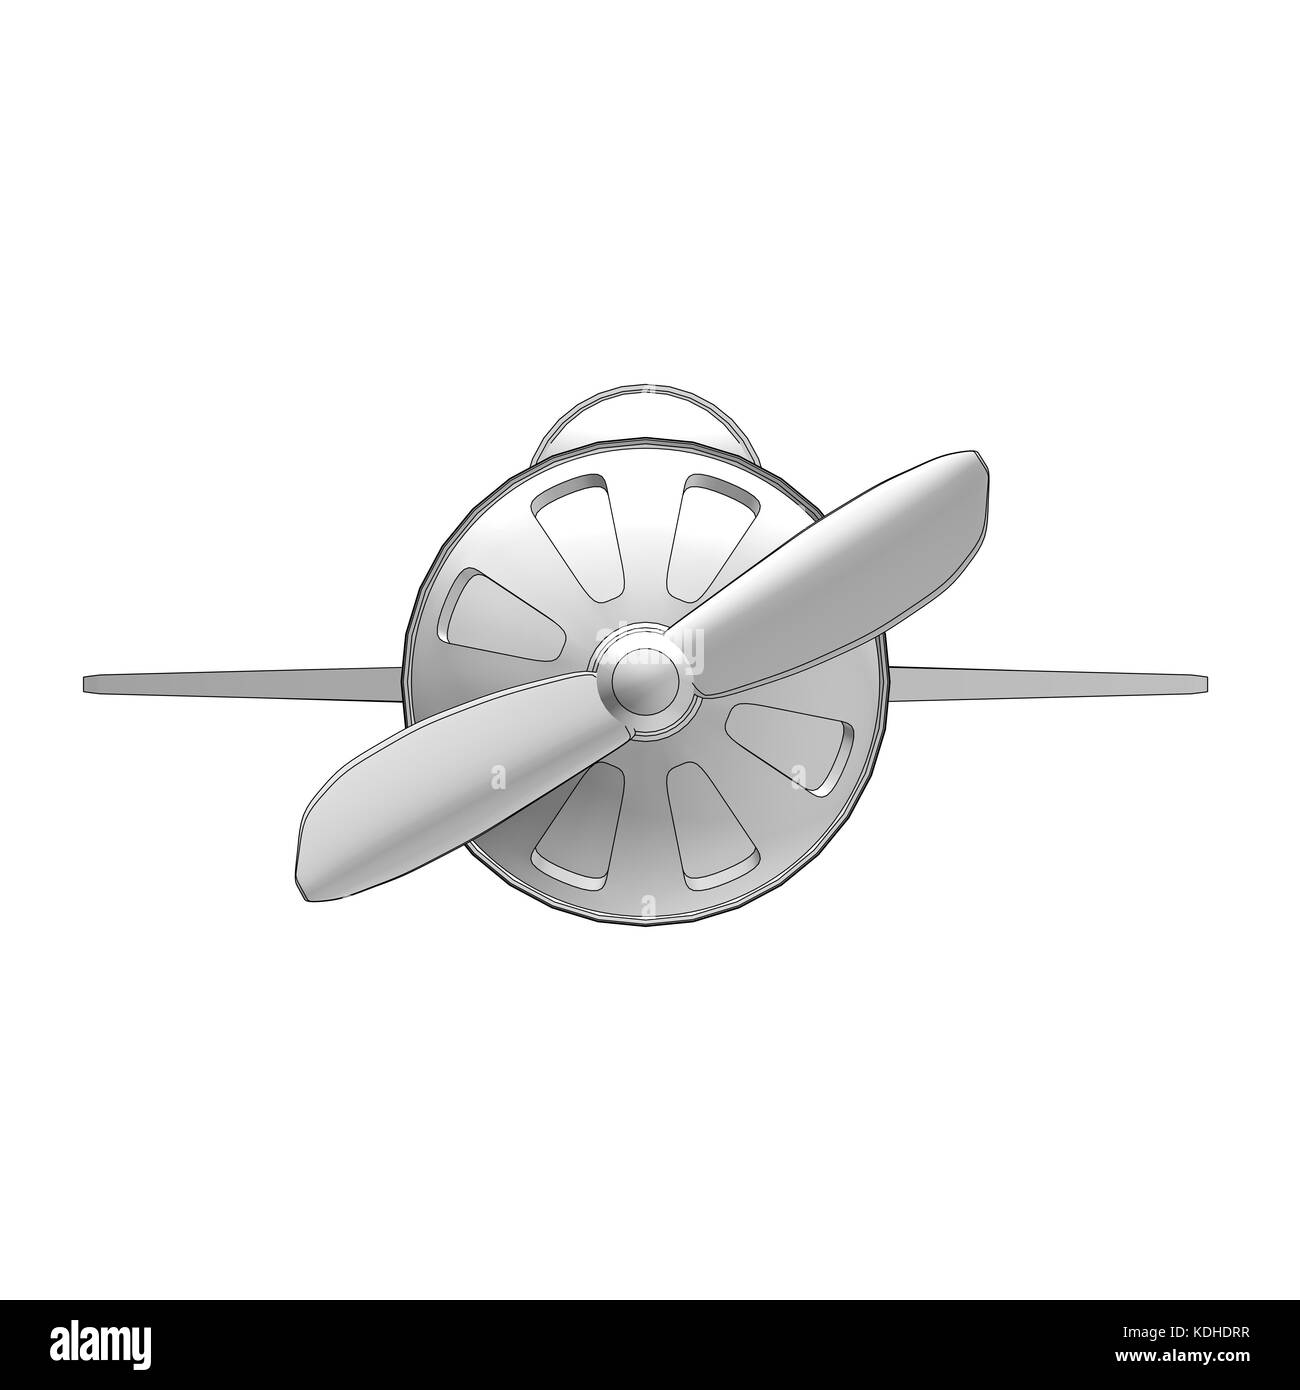 isolated toy airplane with contours in black Stock Photo